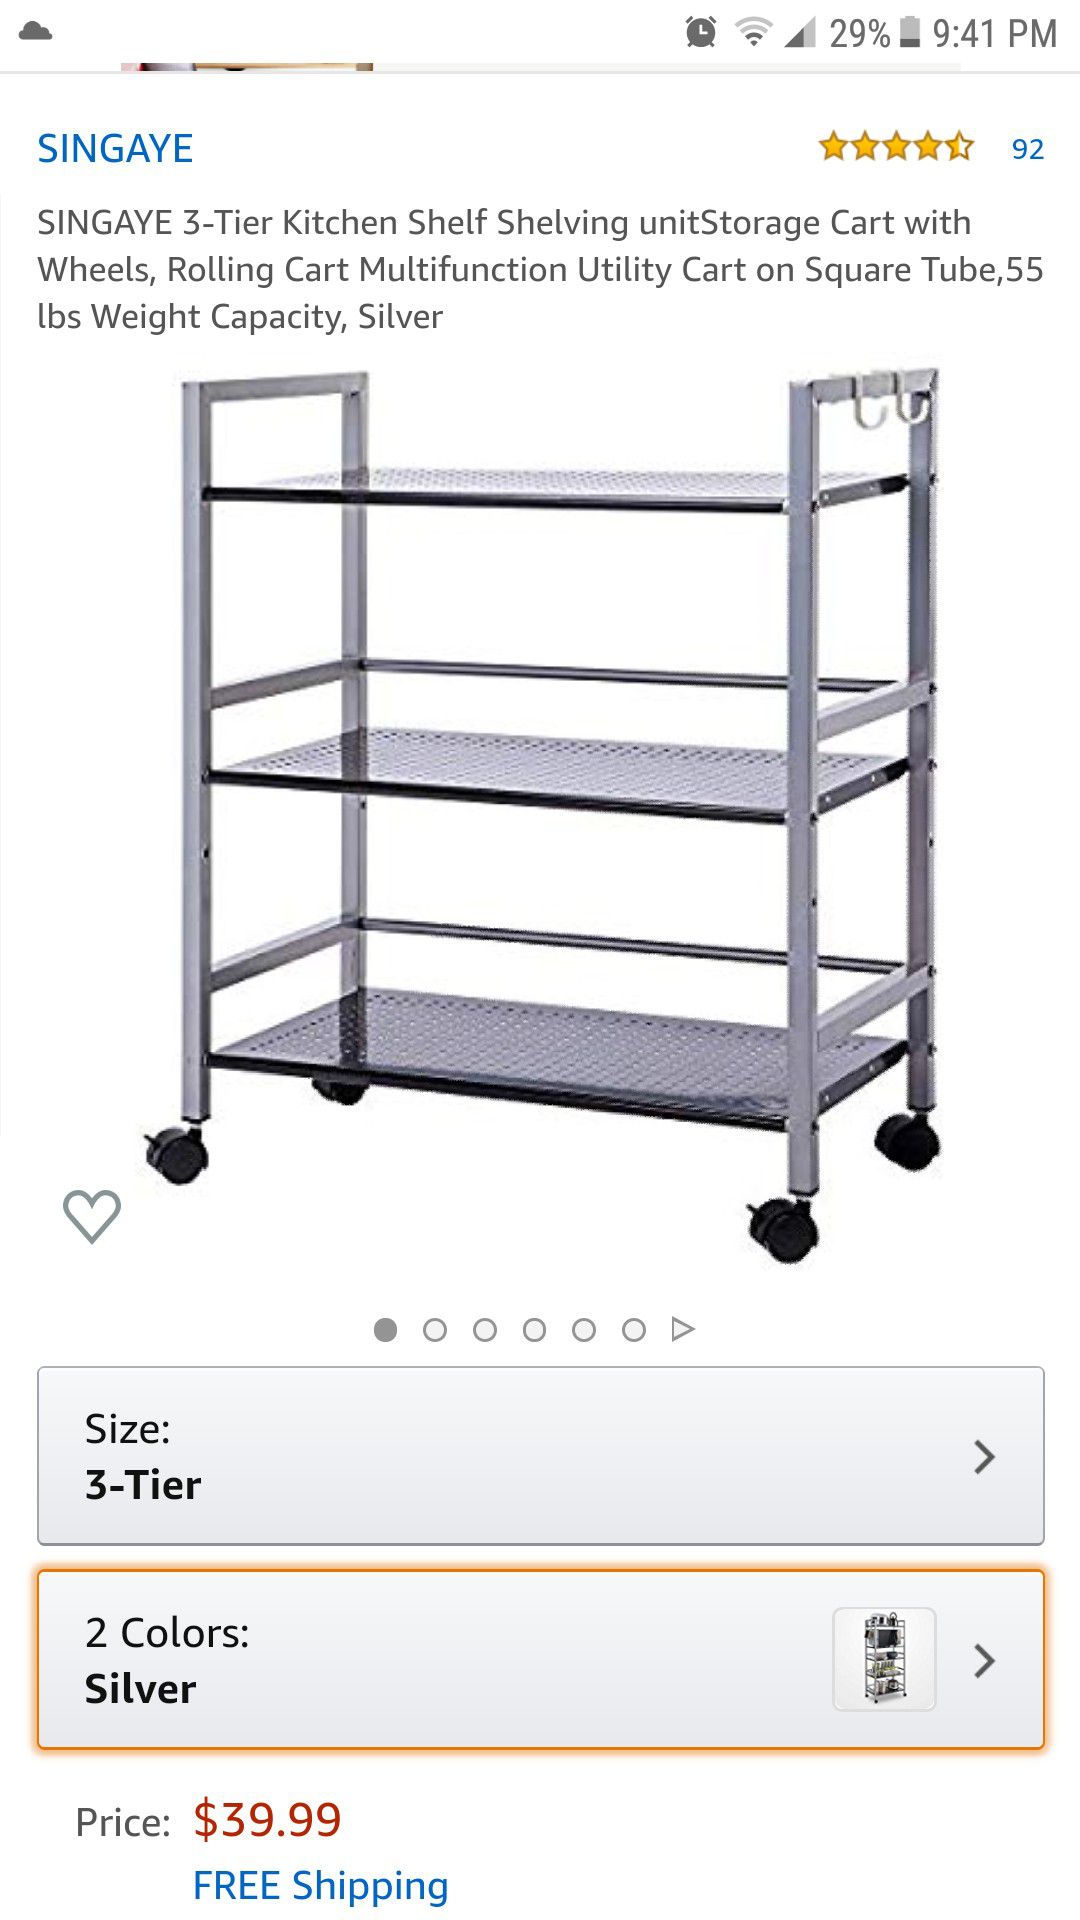 Shelving unit Storage Cart with Wheels